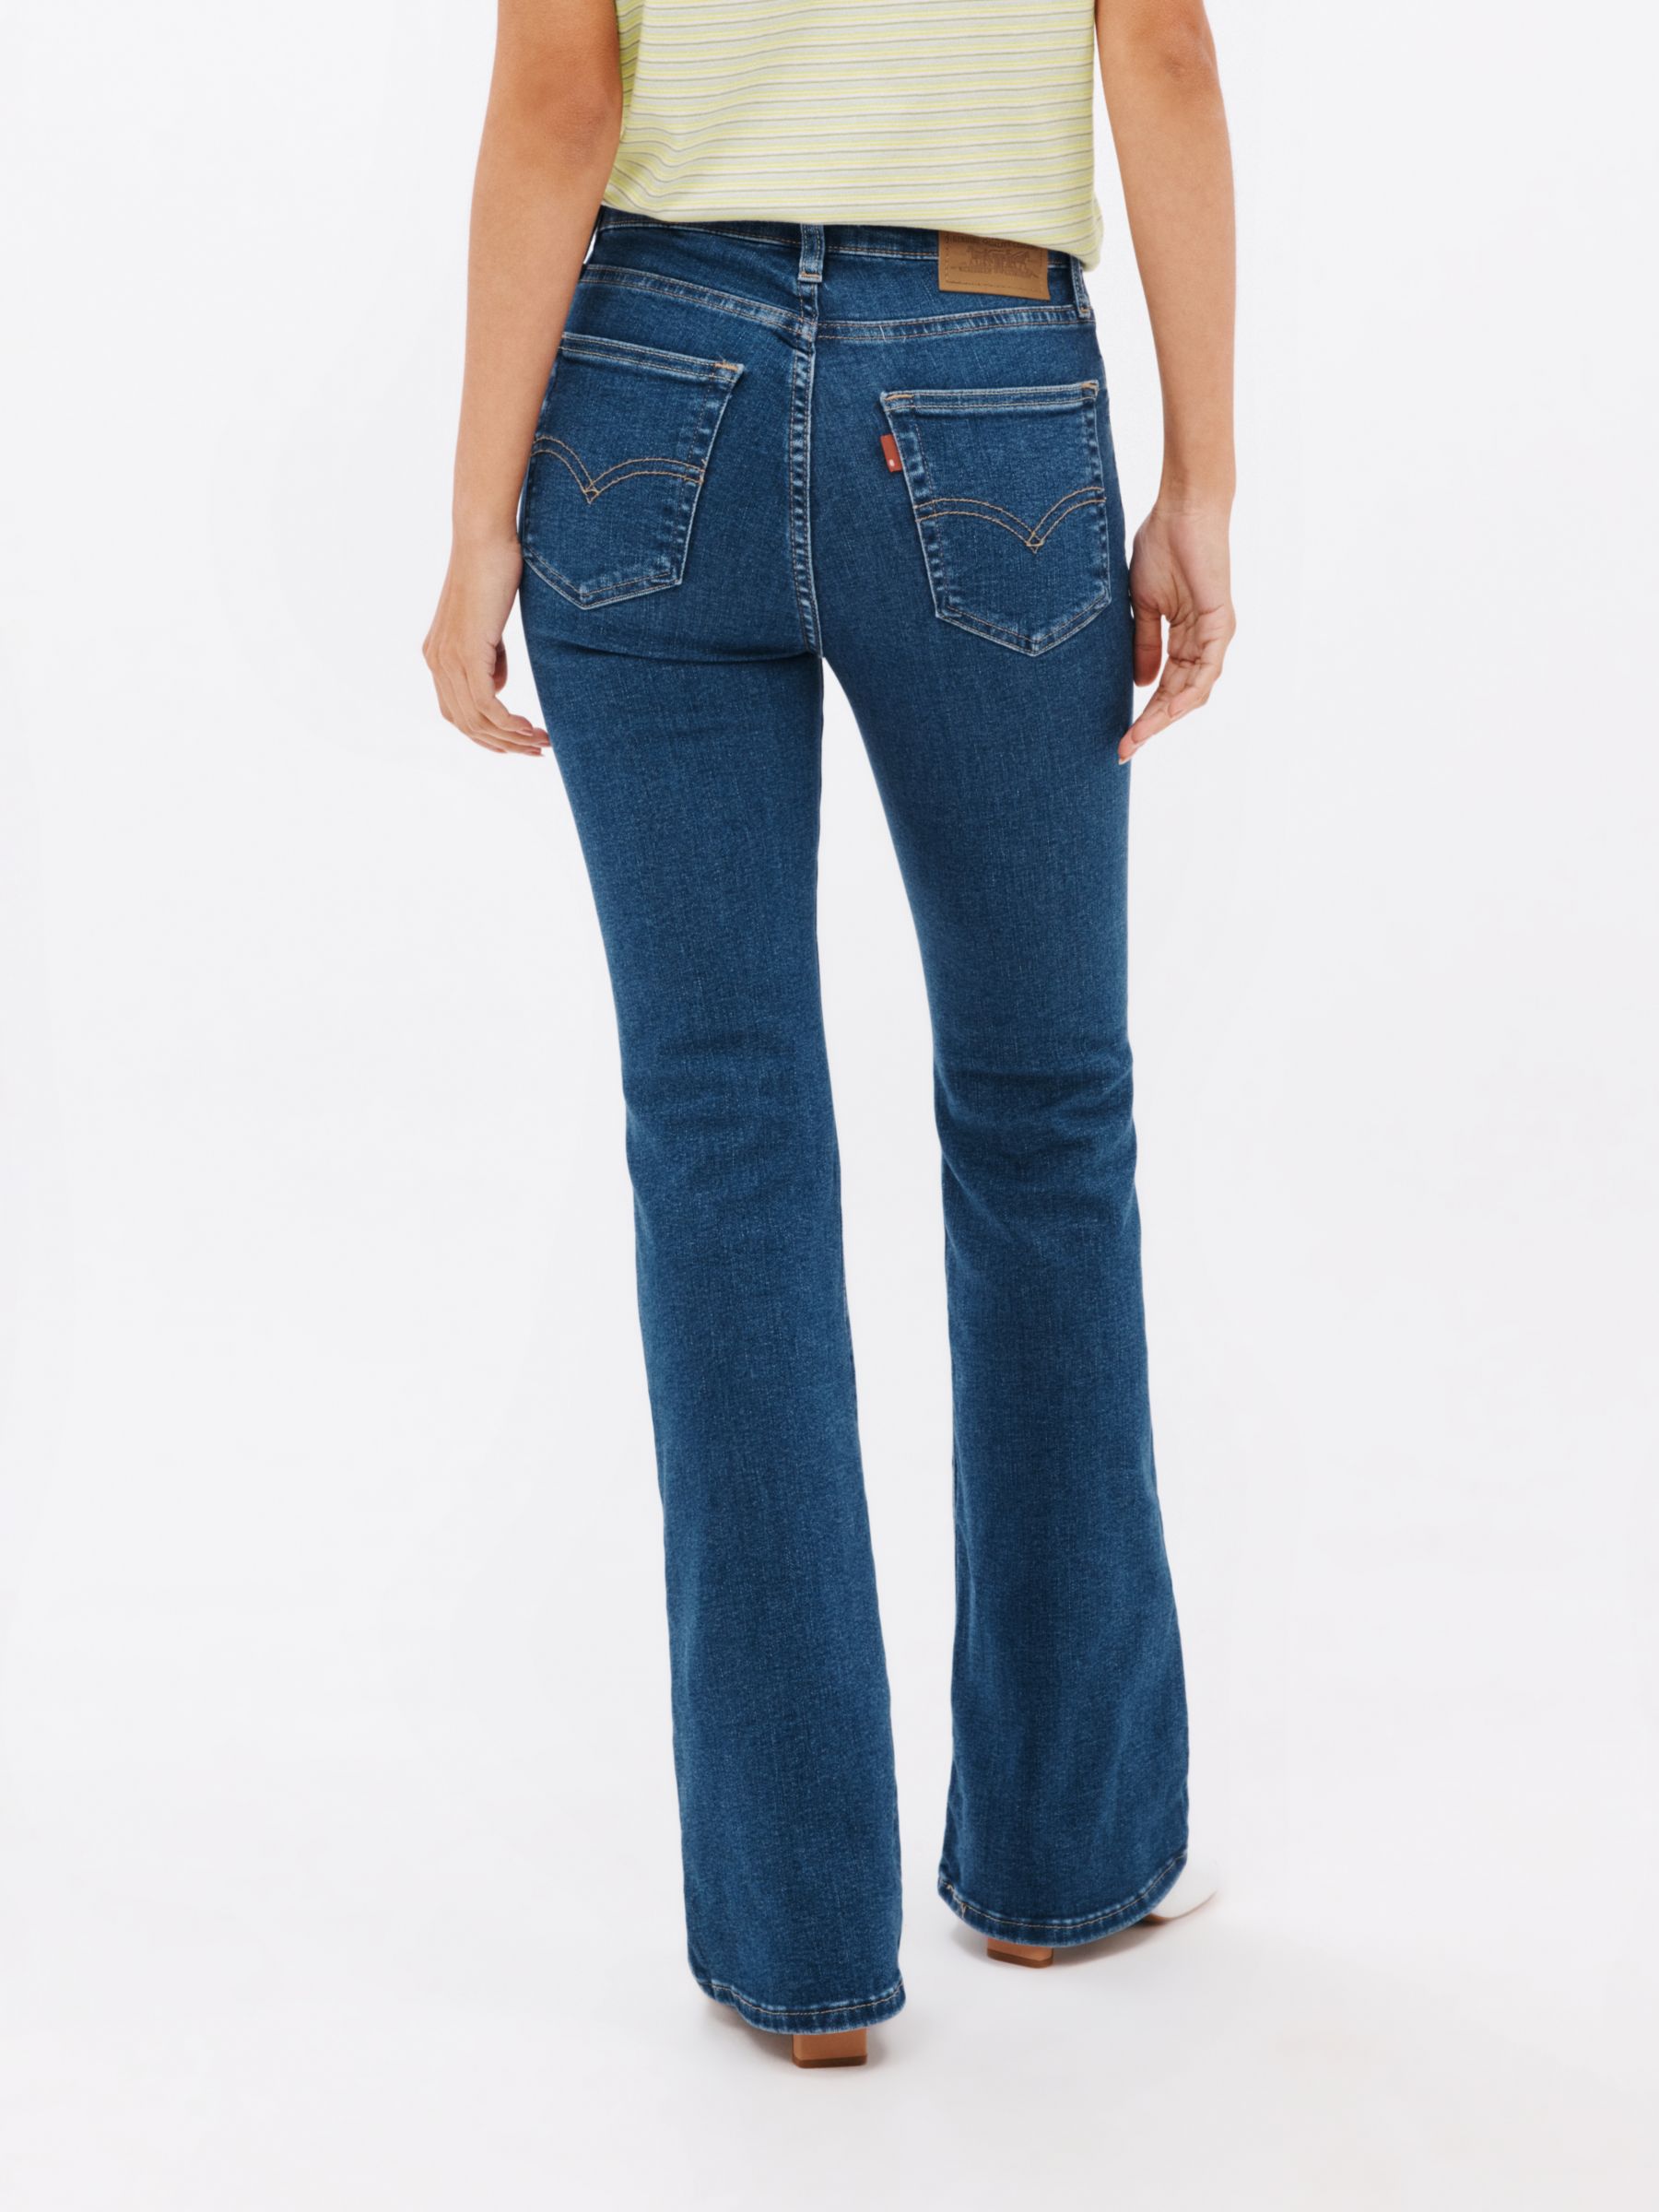 Levis 726 High Rise Flare Jeans Indigo Worn In At John Lewis And Partners 